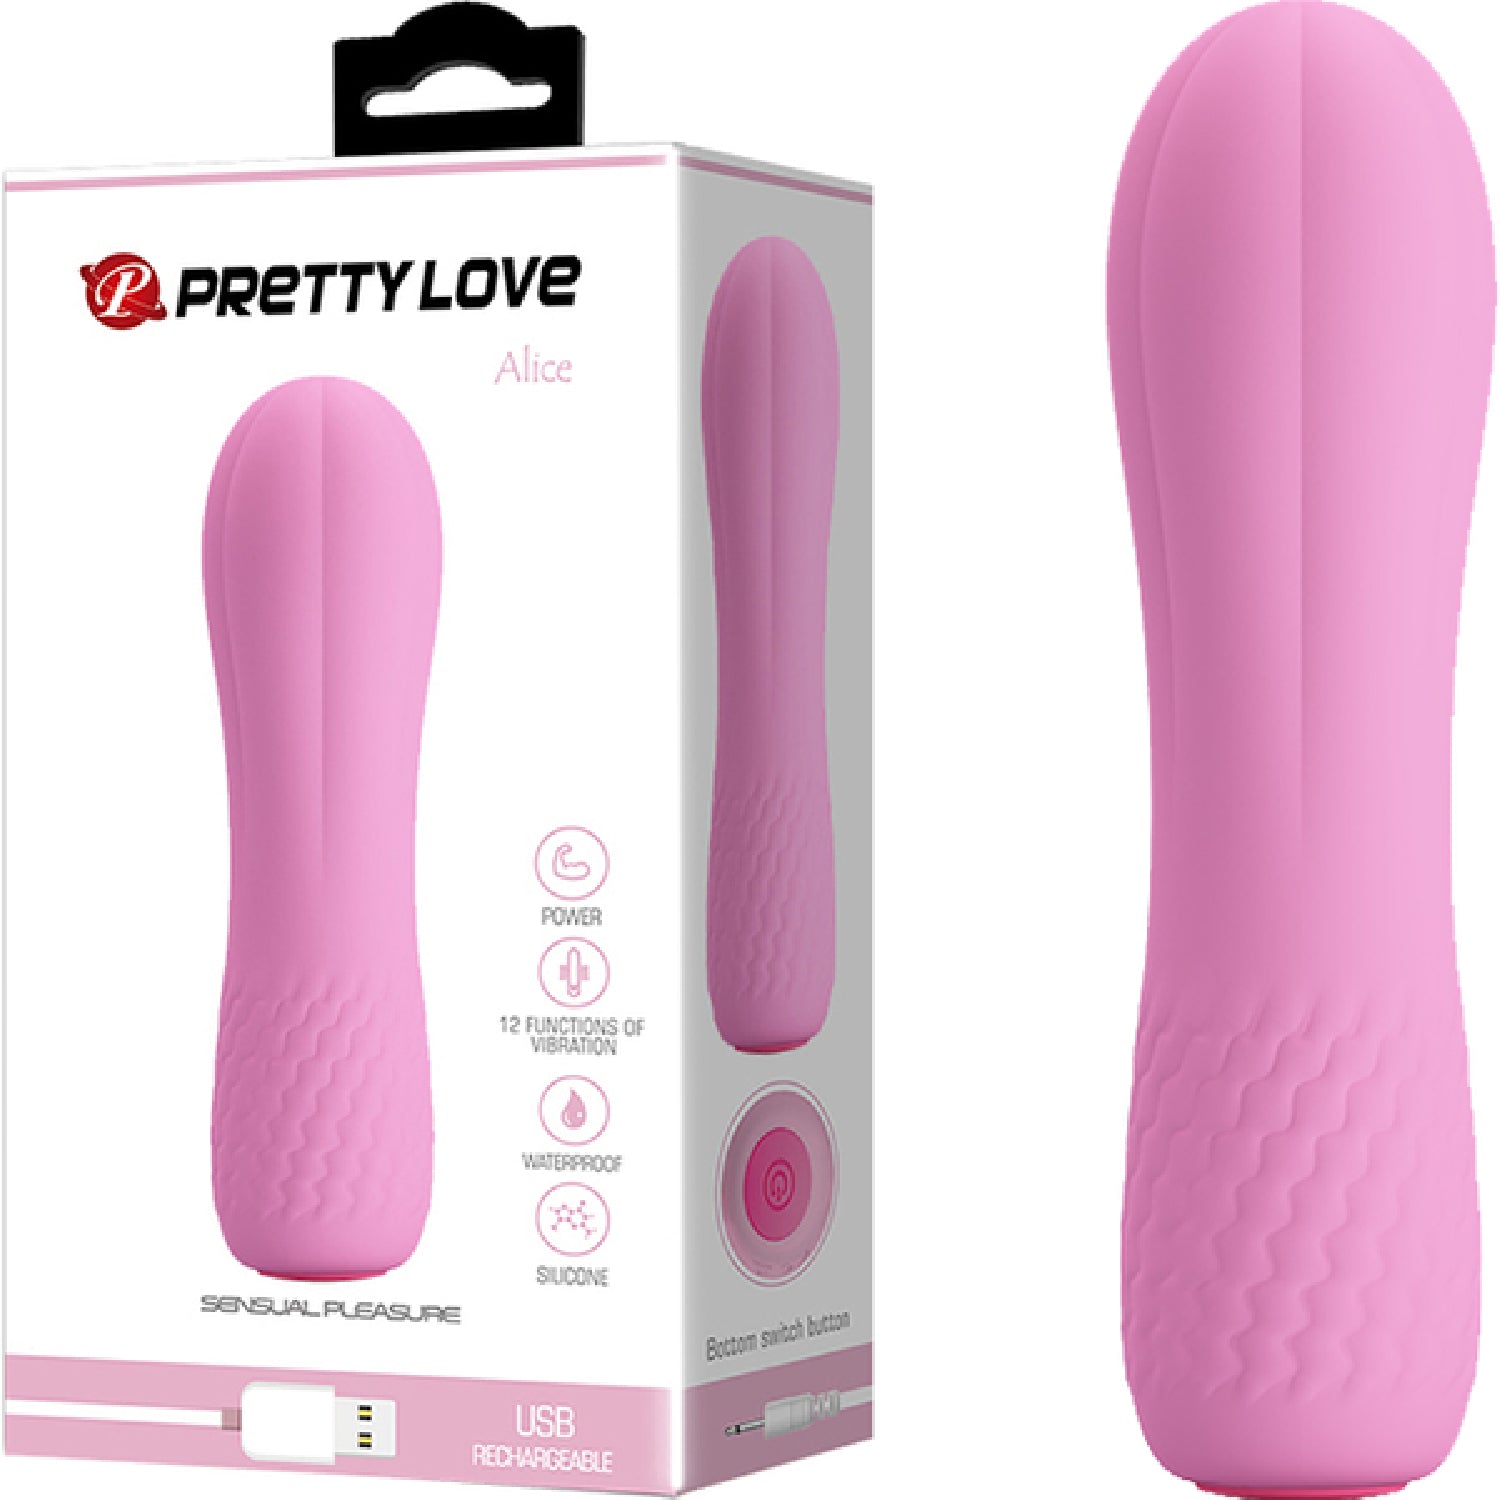 Pretty Love Rechargeable Alice Vibrator Pink - Club X